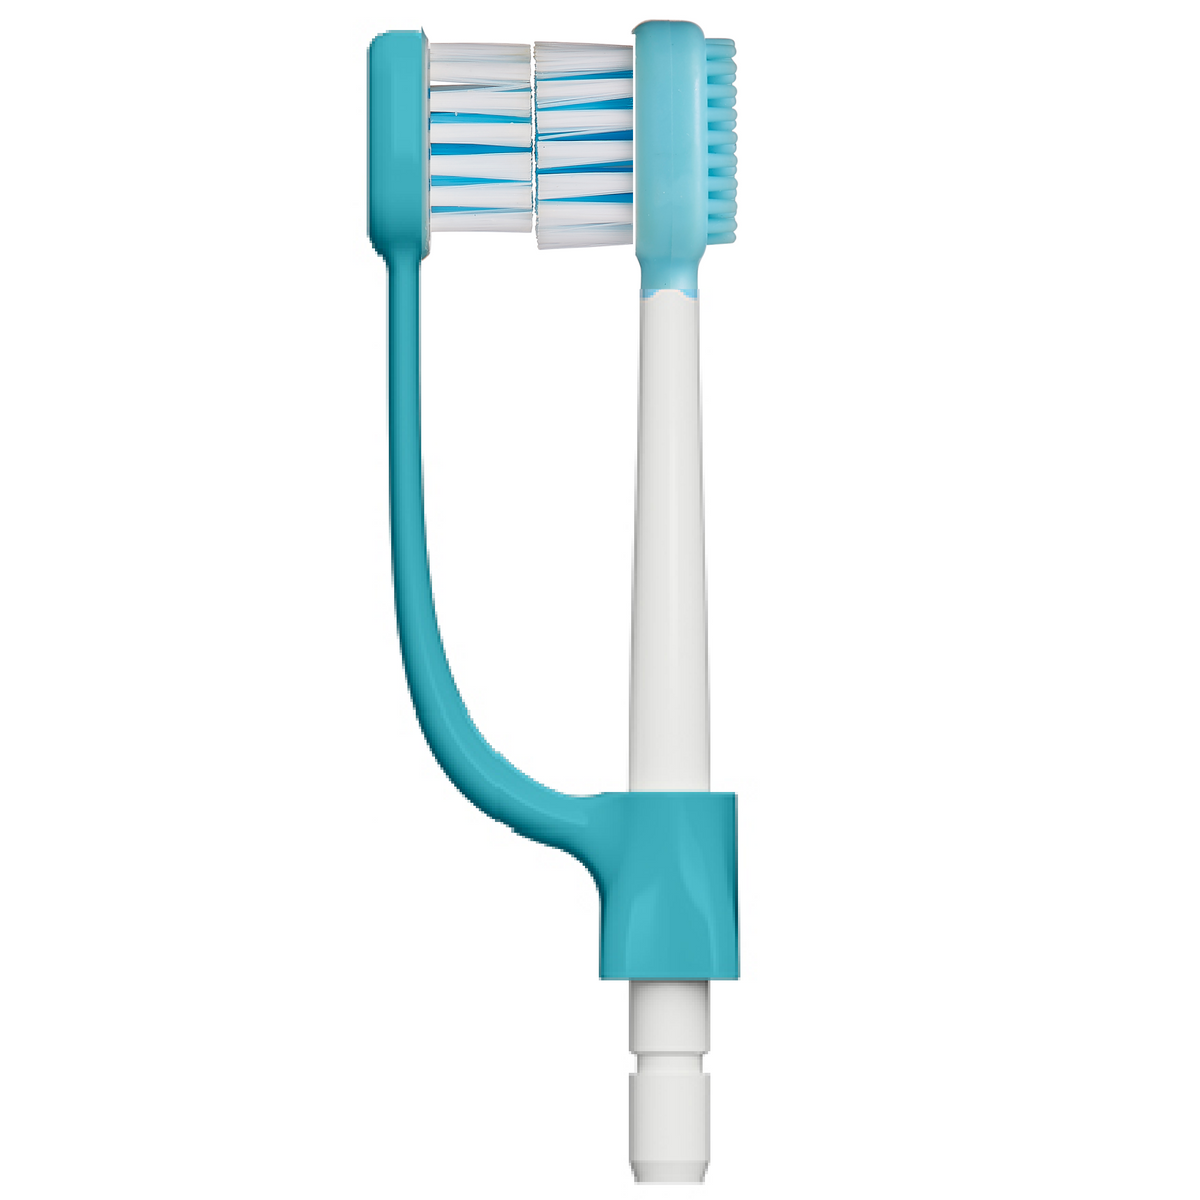 Blue dual headed water flossing toothbrush, only by ToothShower for brushing and flossing both sides of your teeth.